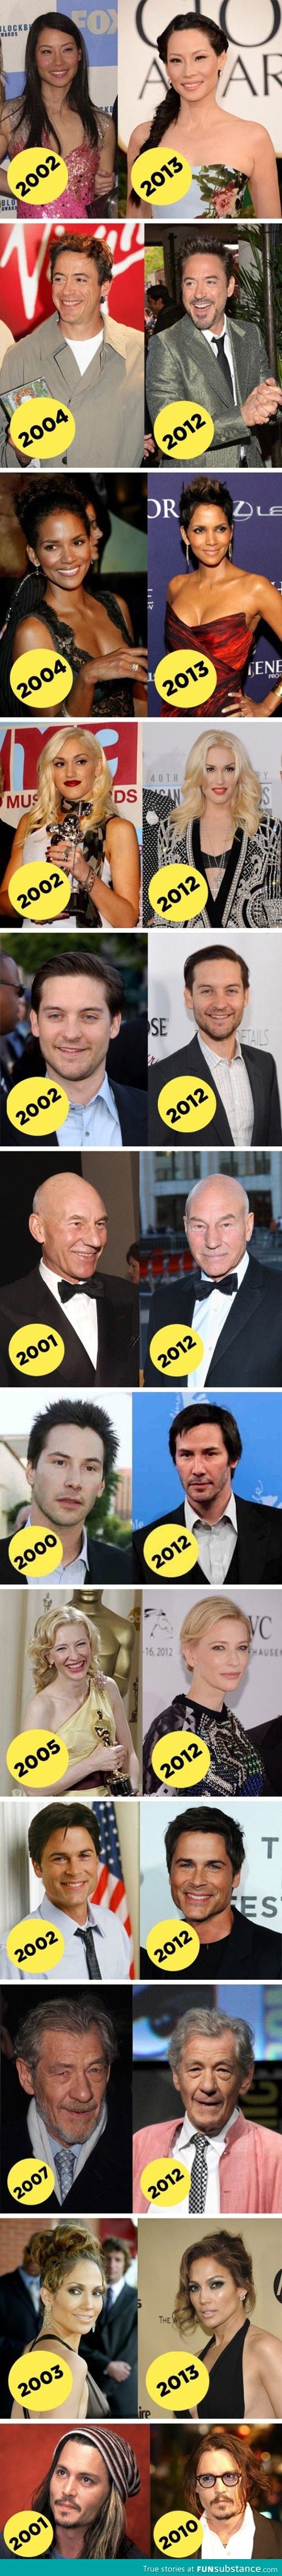 12 Celebrities that don't seem to age